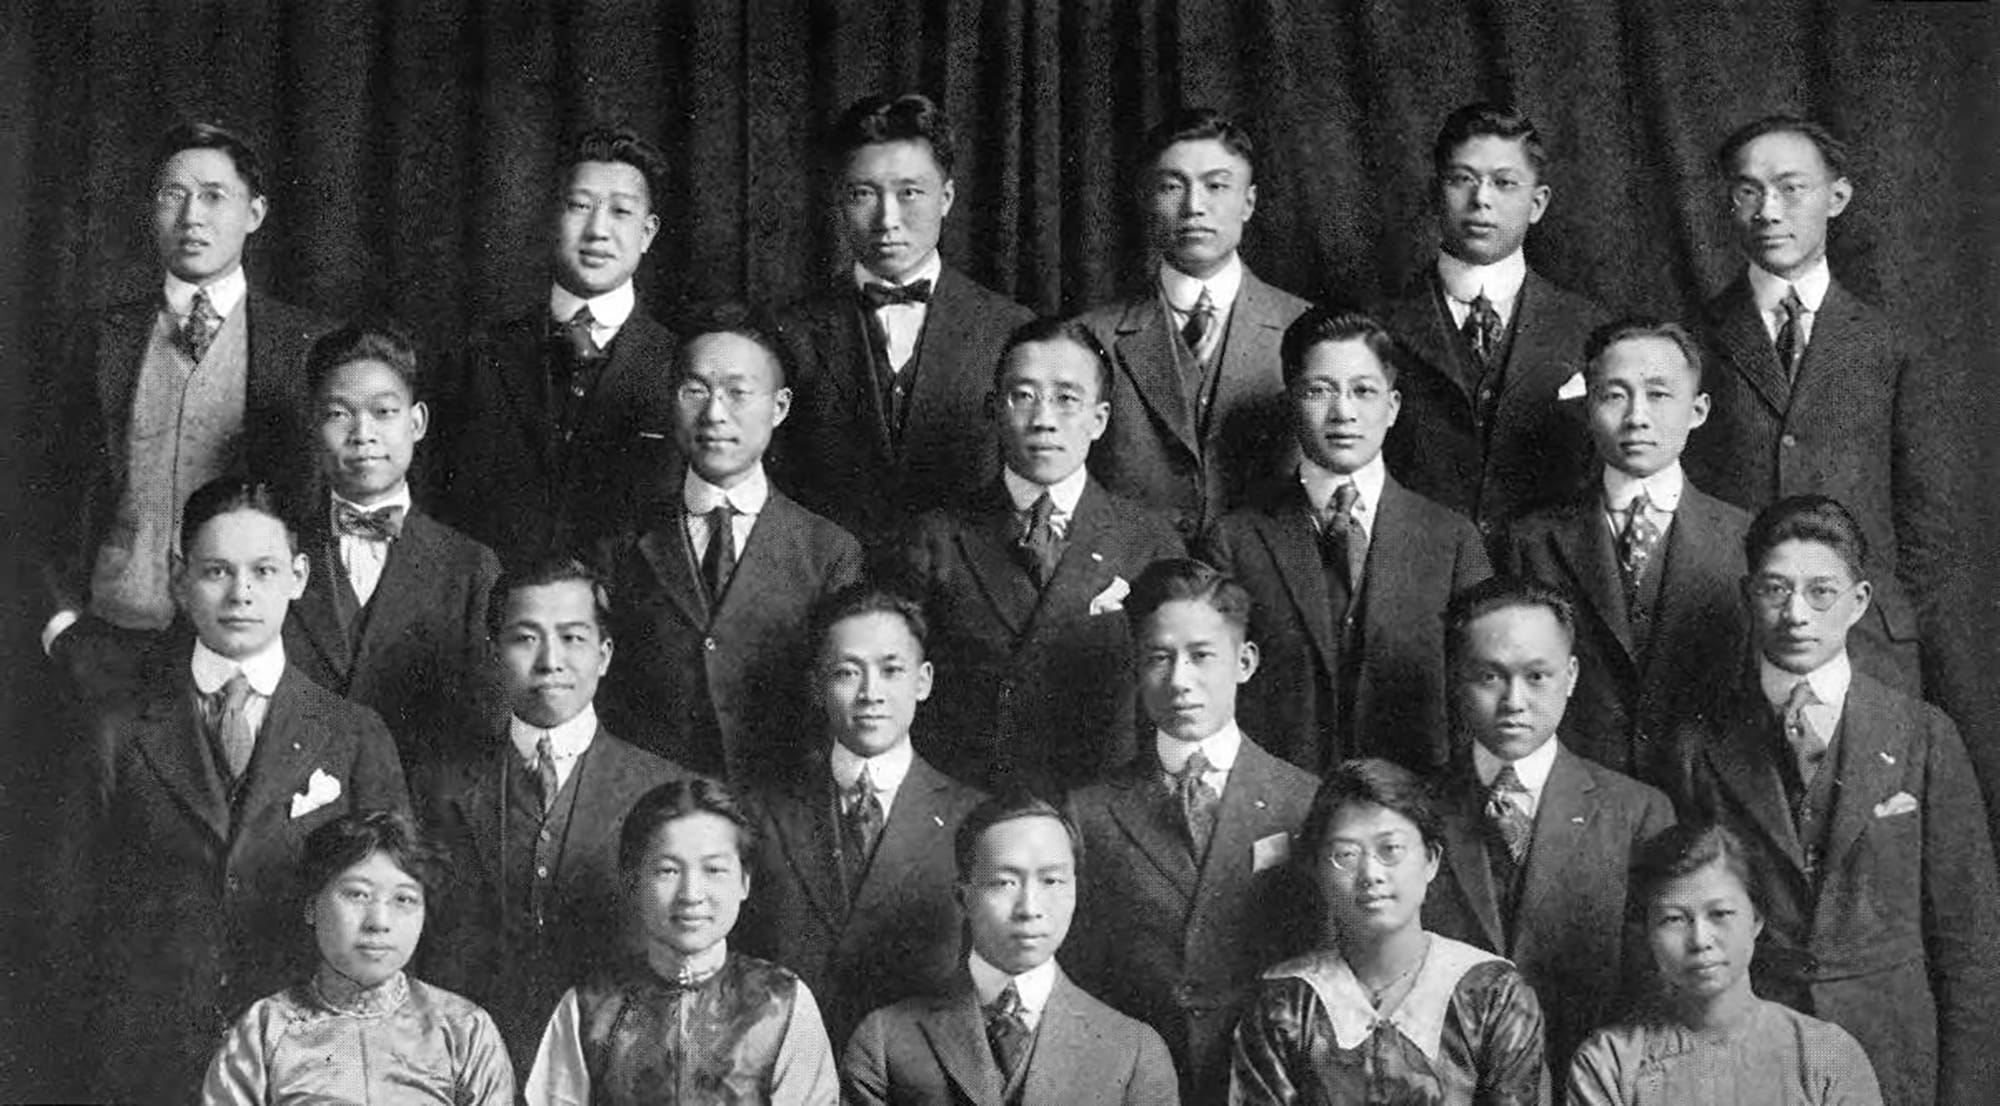 Chinese Student Club members pose for a group photograph.